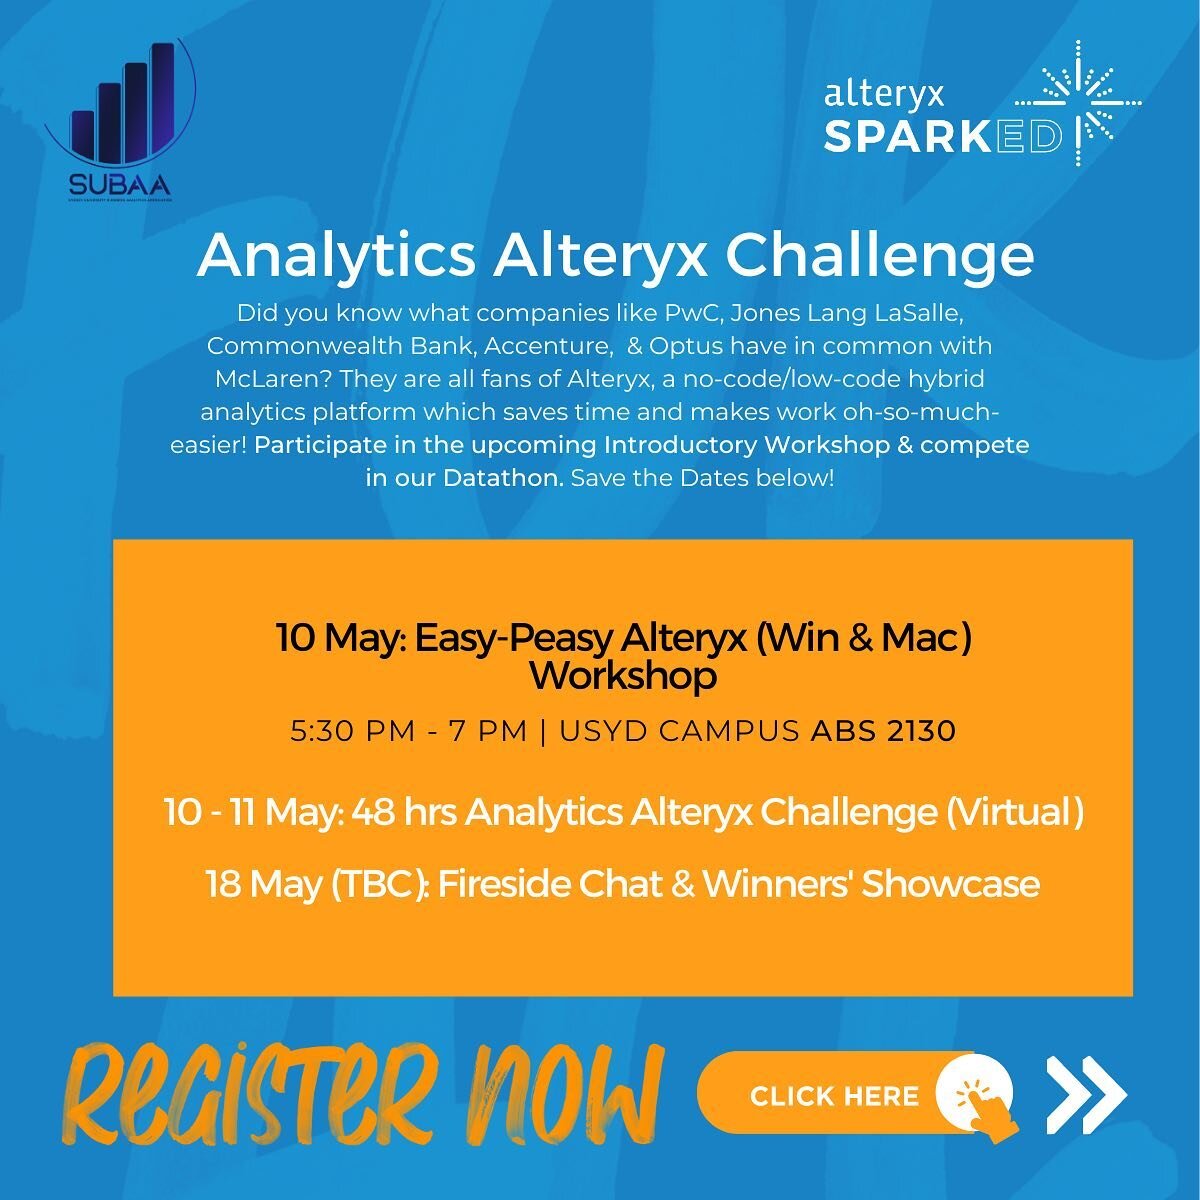 Join the✨DATATHON✨Analytics Alteryx Challenge and discover why top companies like PwC, Accenture, and McLaren are raving about this no-code/low-code analytics platform💻

👉🏻Sign up via link in bio or https://forms.office.com/r/P2SMqkJ7cR

Key Dates